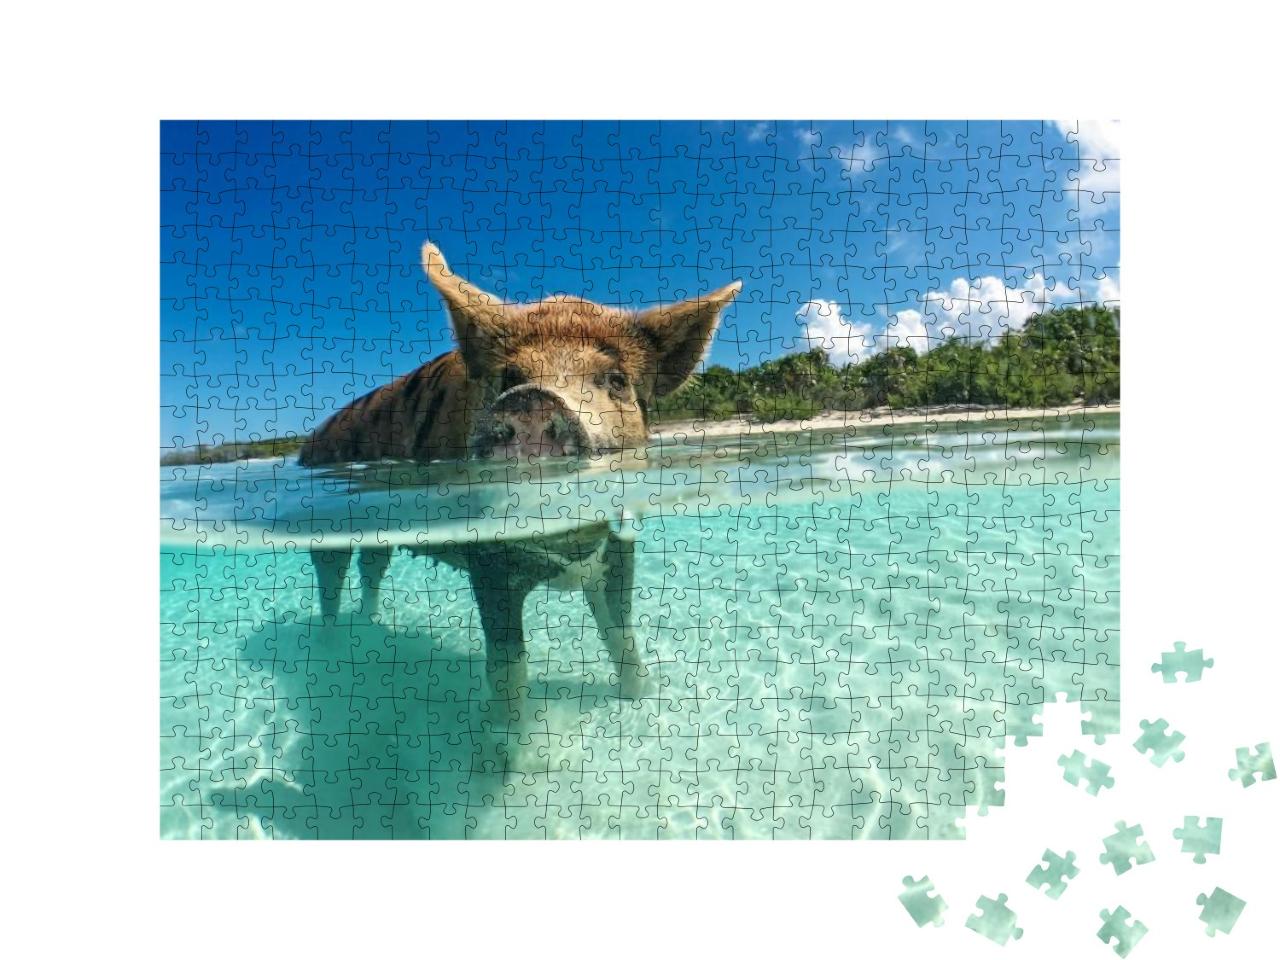 Wild, Swimming Pig on Big Majors Cay in the Bahamas... Jigsaw Puzzle with 500 pieces